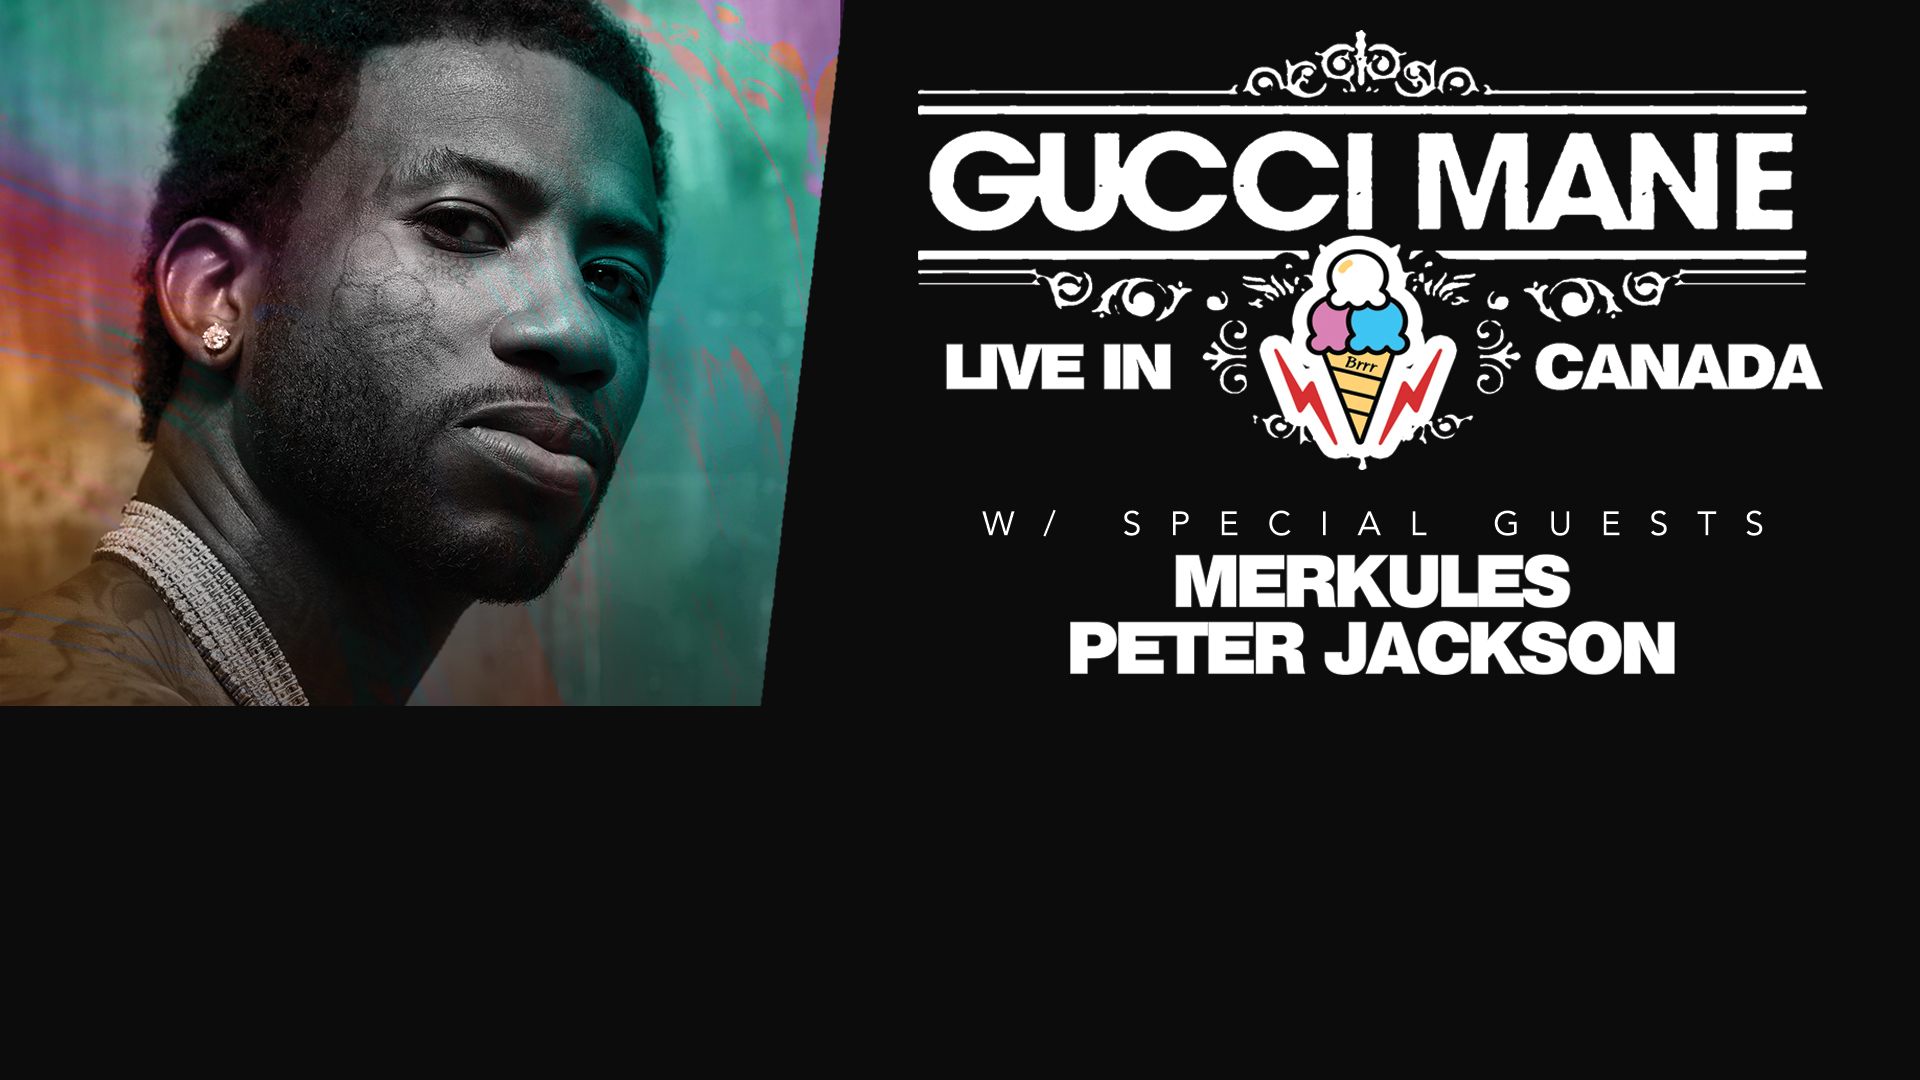 Gucci Mane with Merkules and Peter Jackson at the SOEC in Penticton on May 28, 2019.